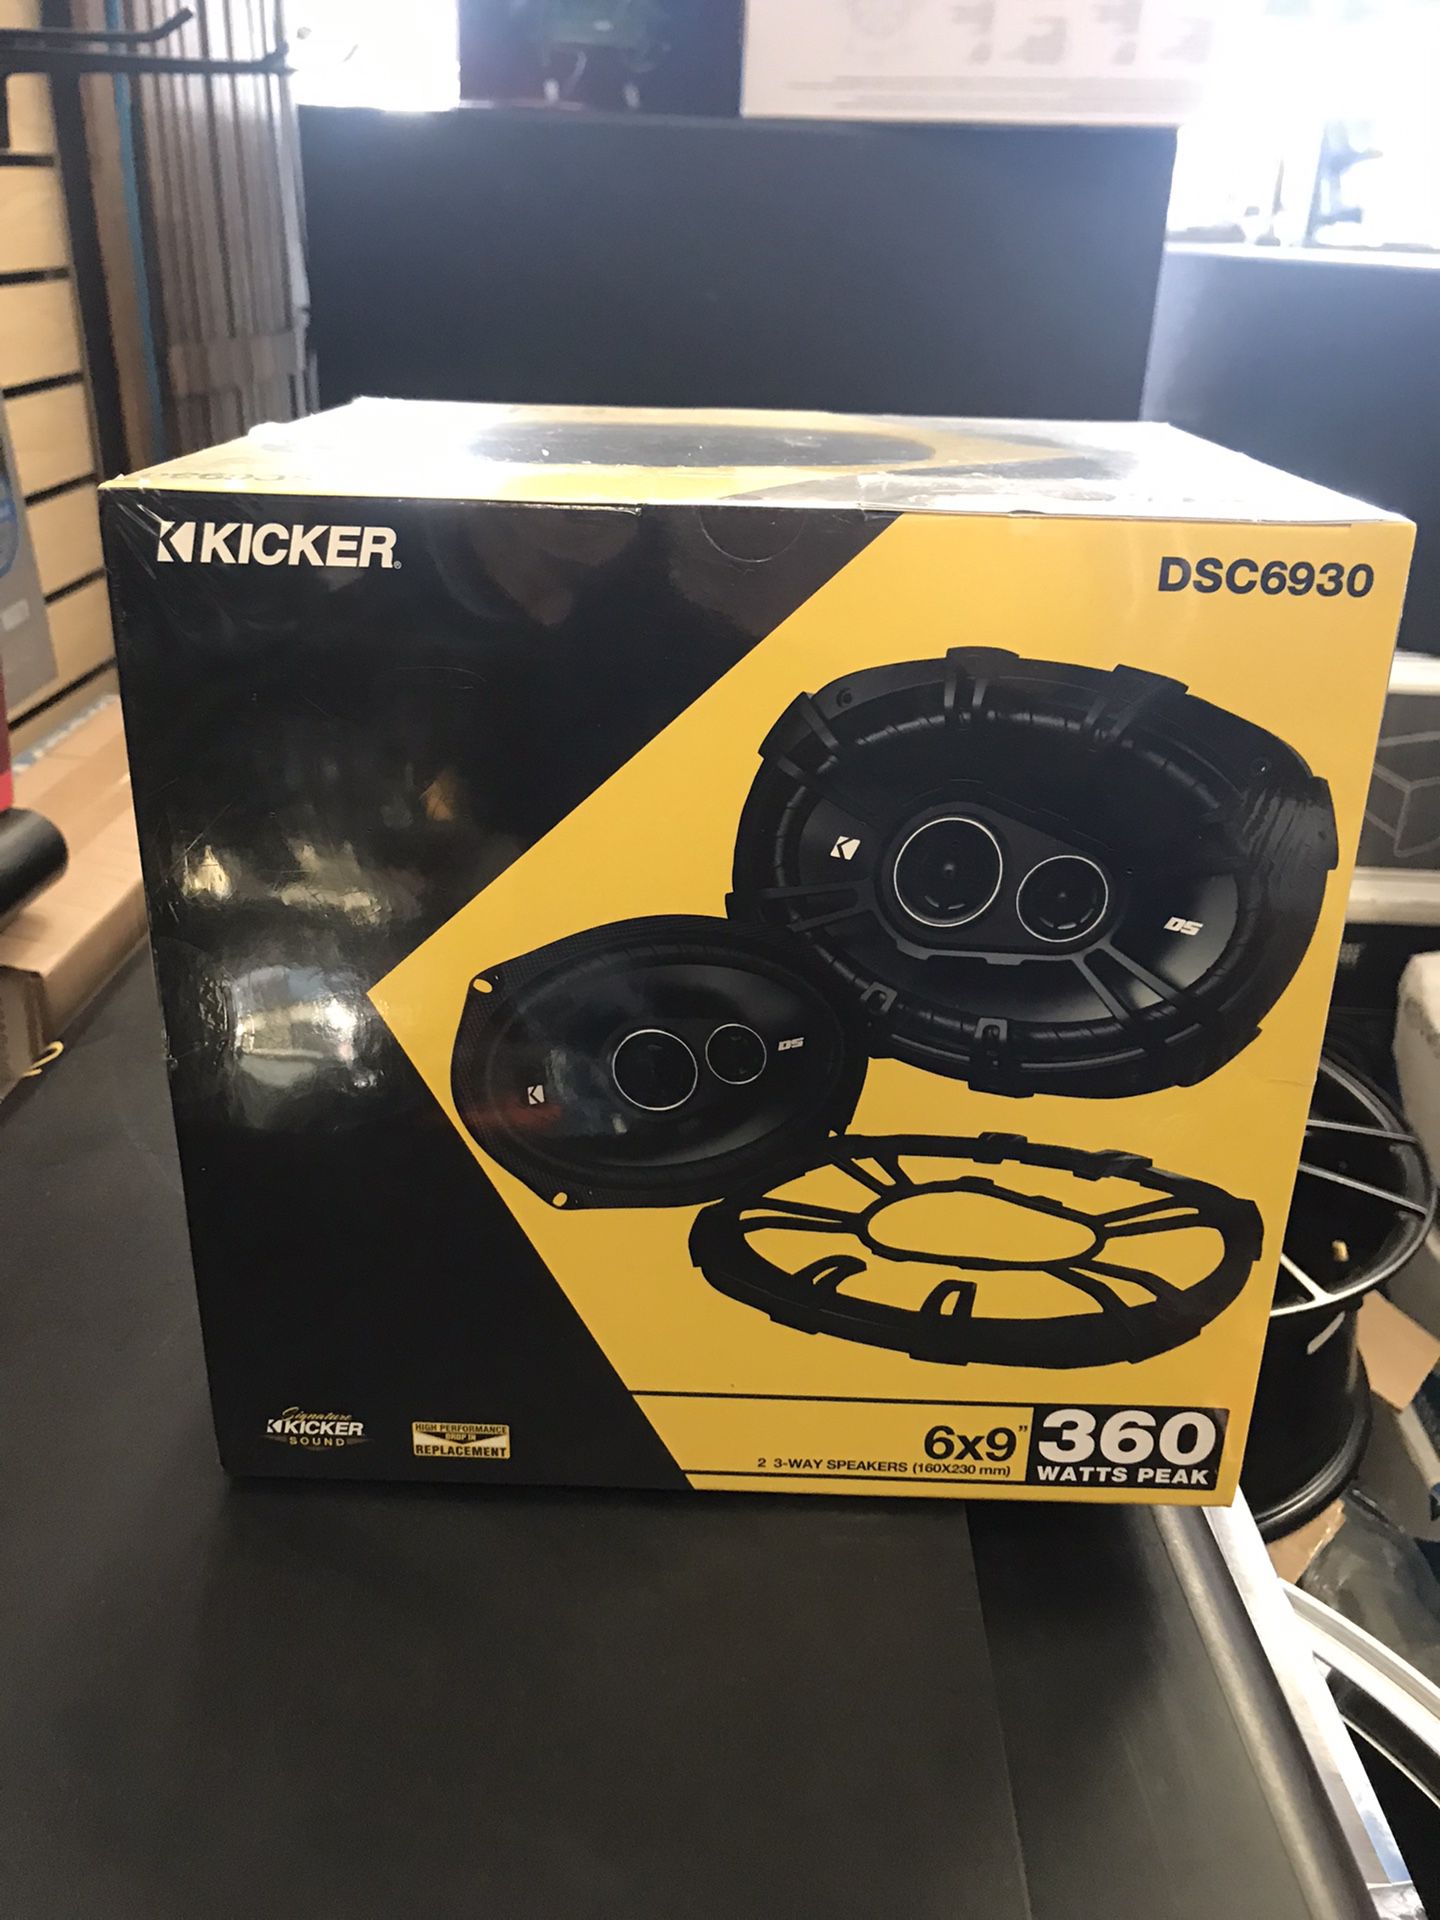 Kicker 6x9 On Sale Today For 69.99